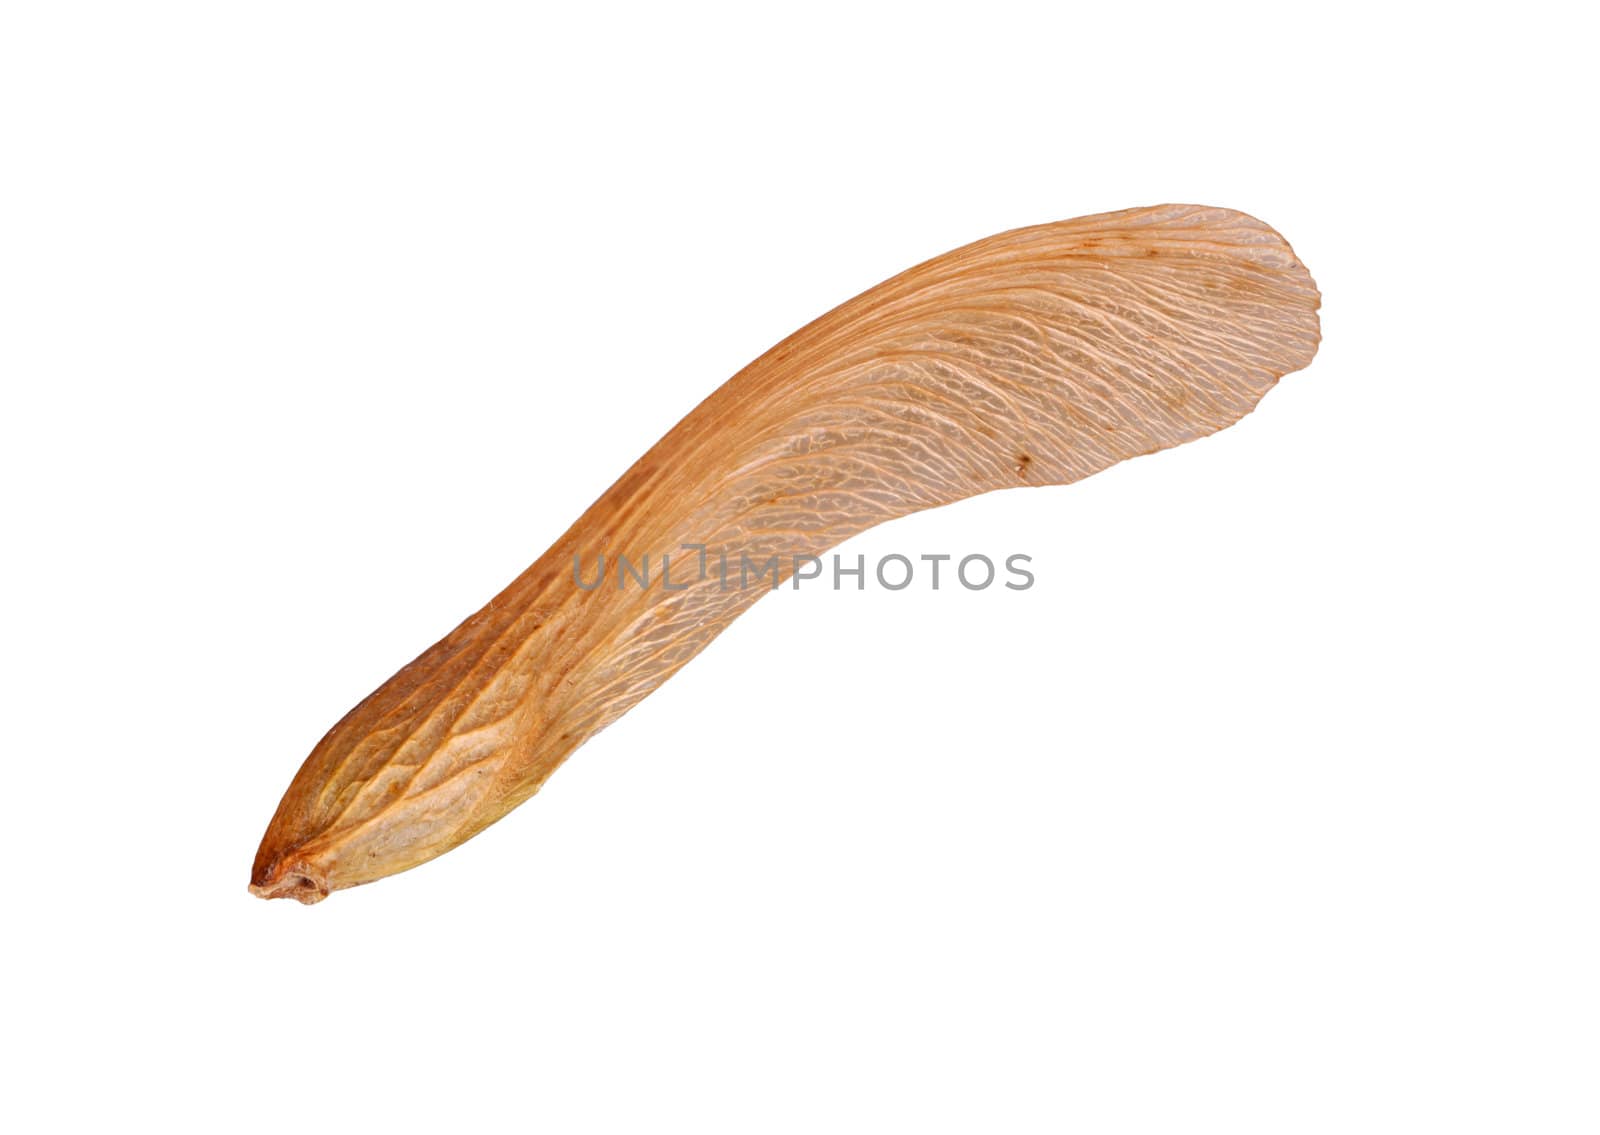 Single winged seed or samara of a silver or swamp maple (Acer saccharinum) isolated against a white background